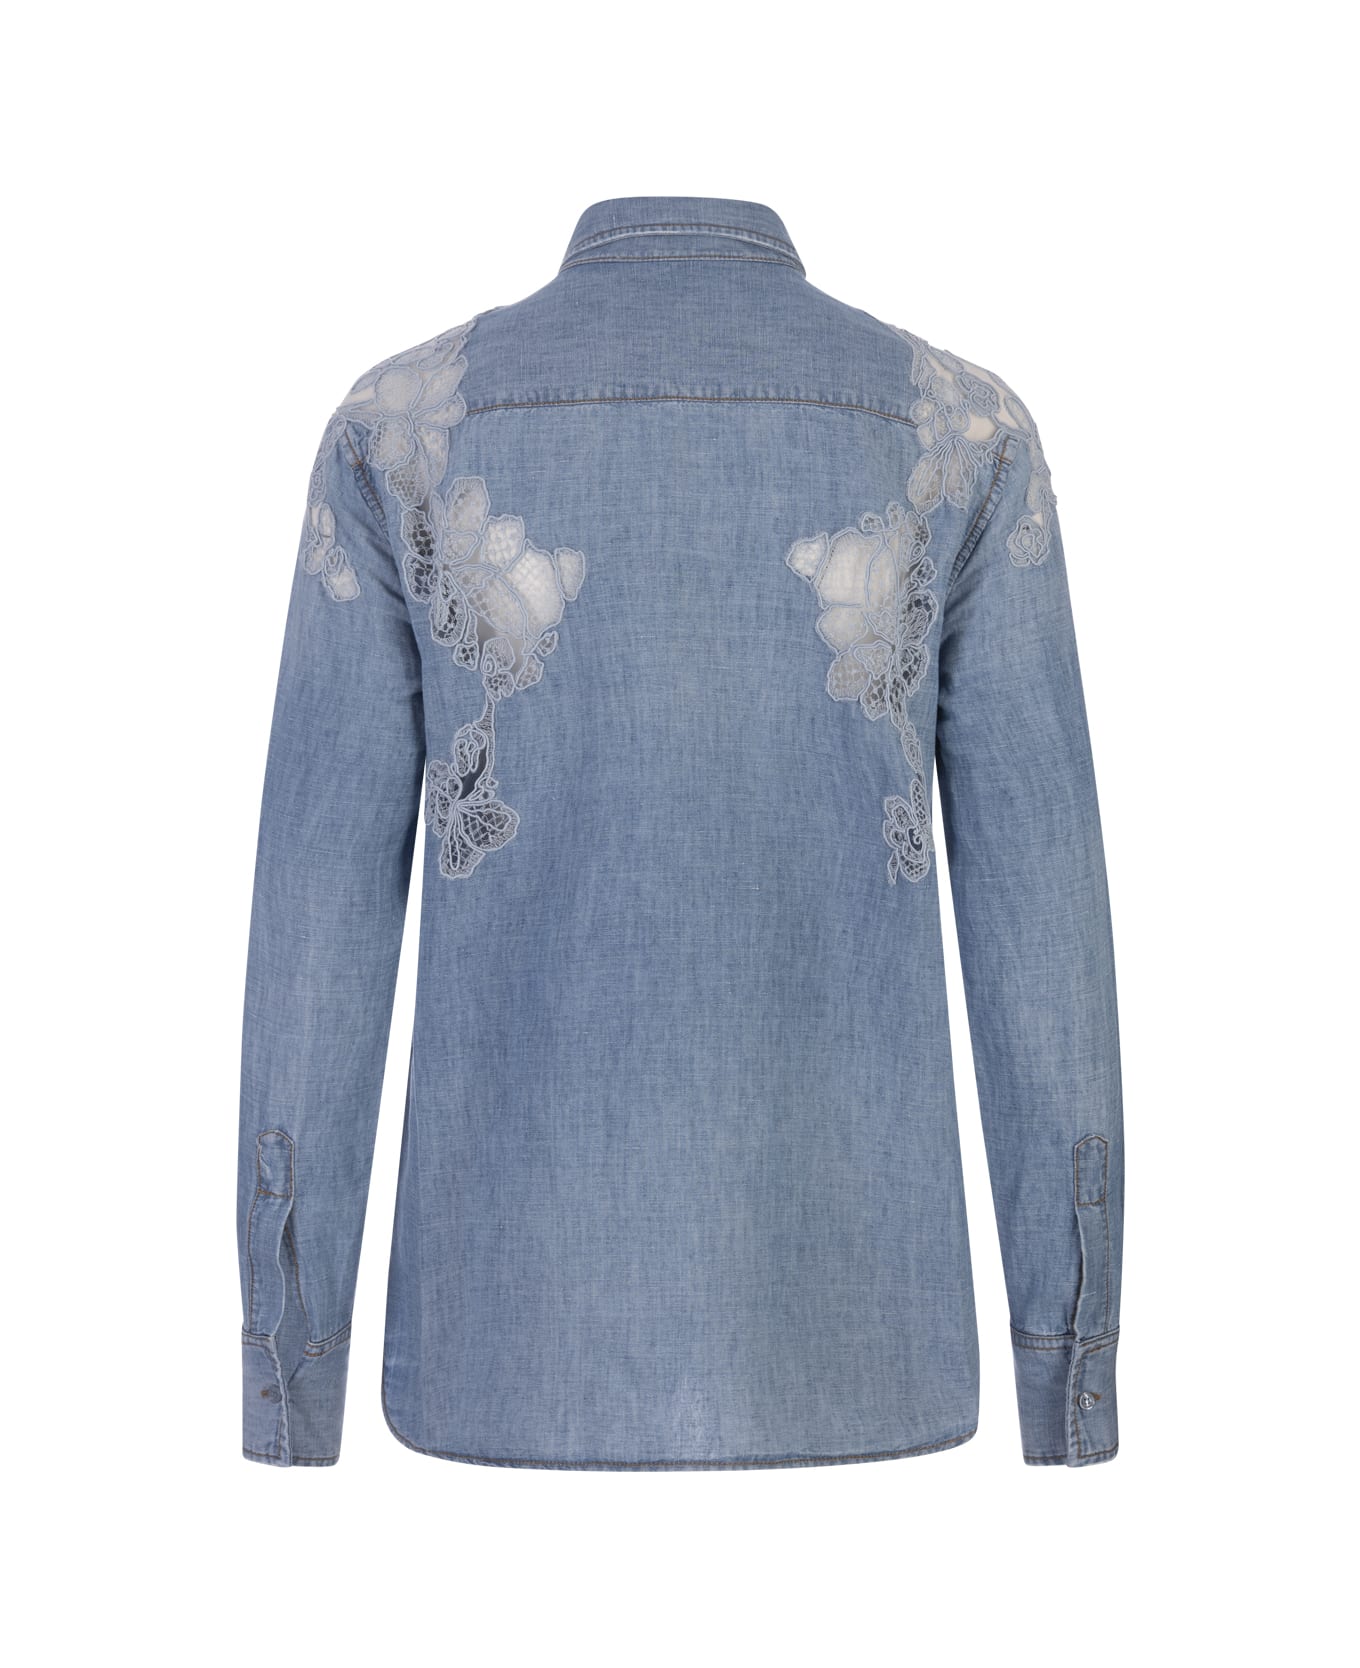 Ermanno Scervino Jeans Shirt With Lace - Blue シャツ